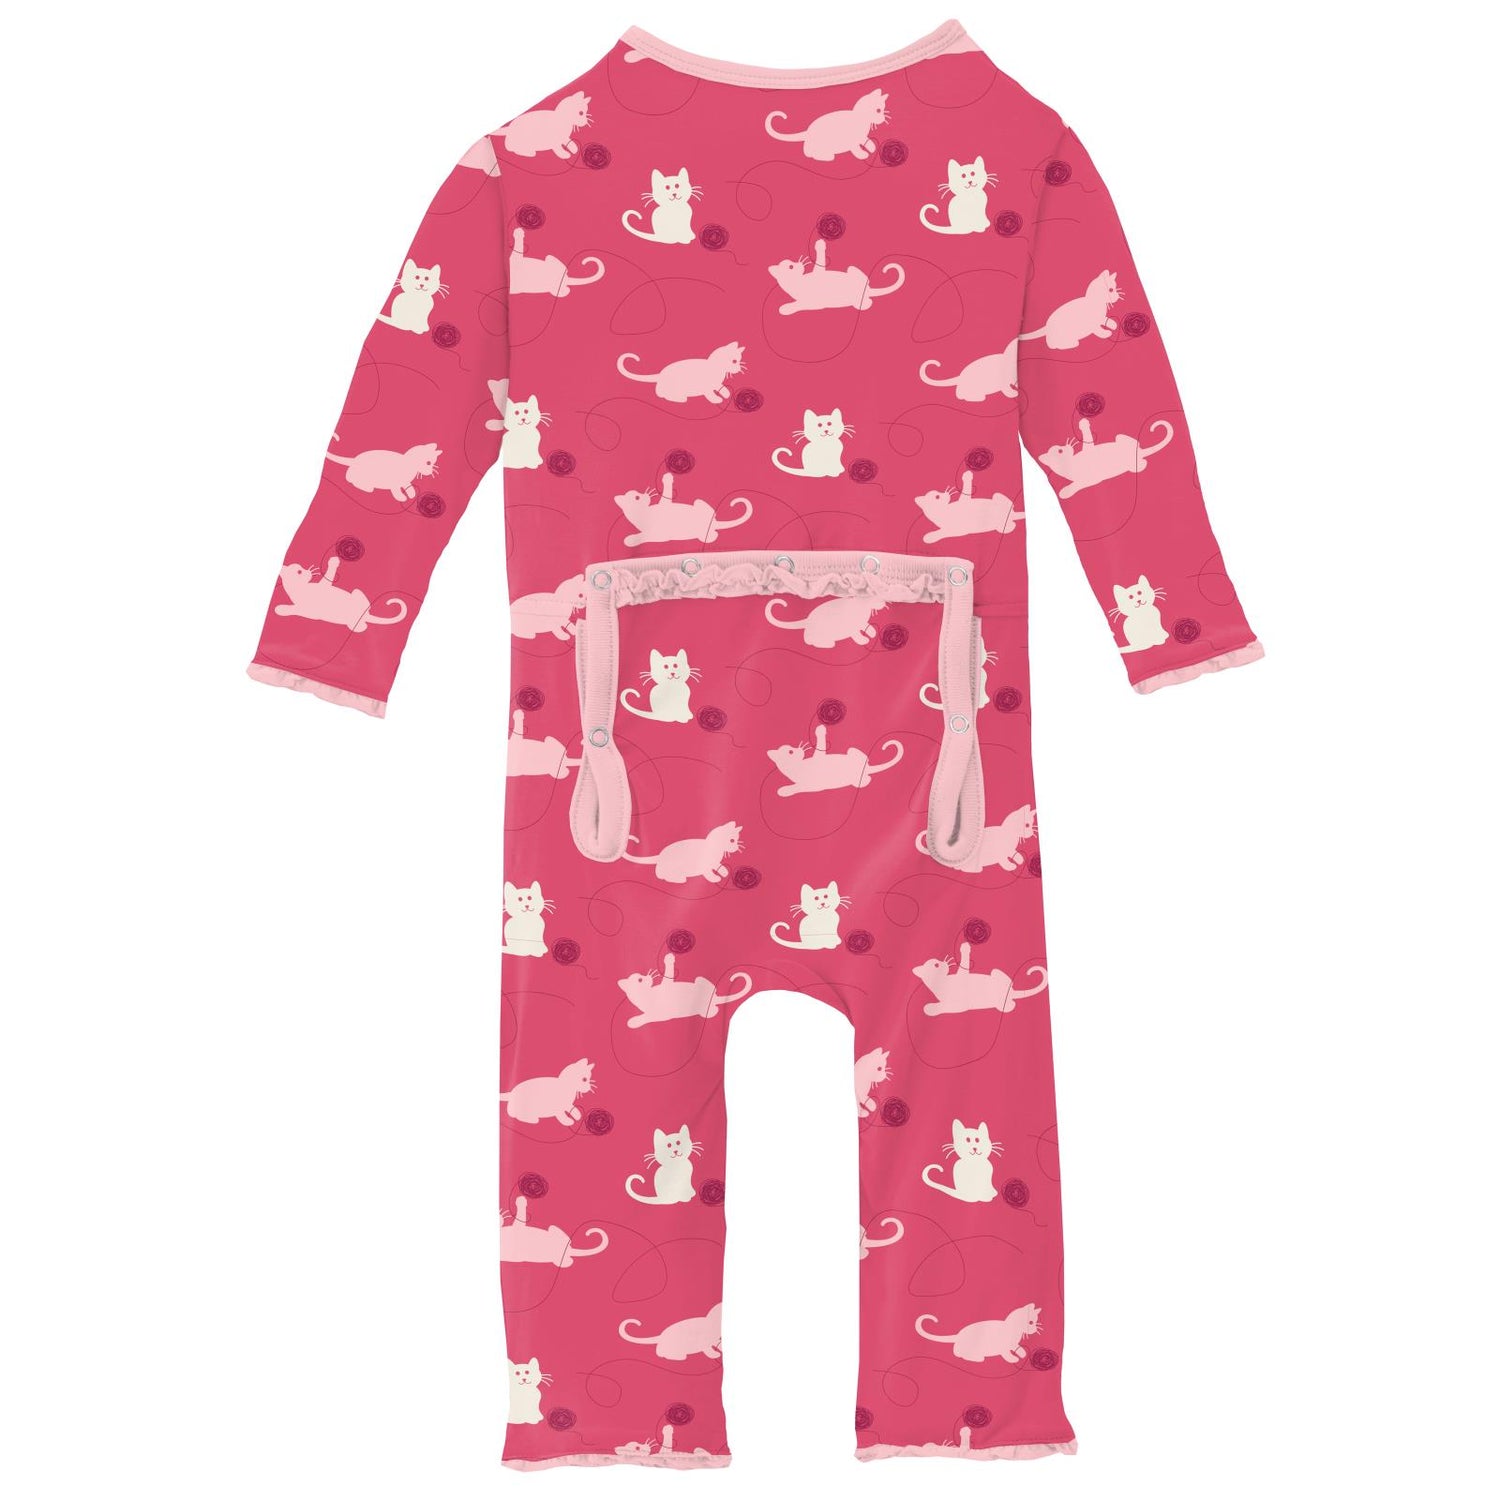 Print Muffin Ruffle Coverall with Zipper in Winter Rose Kitty